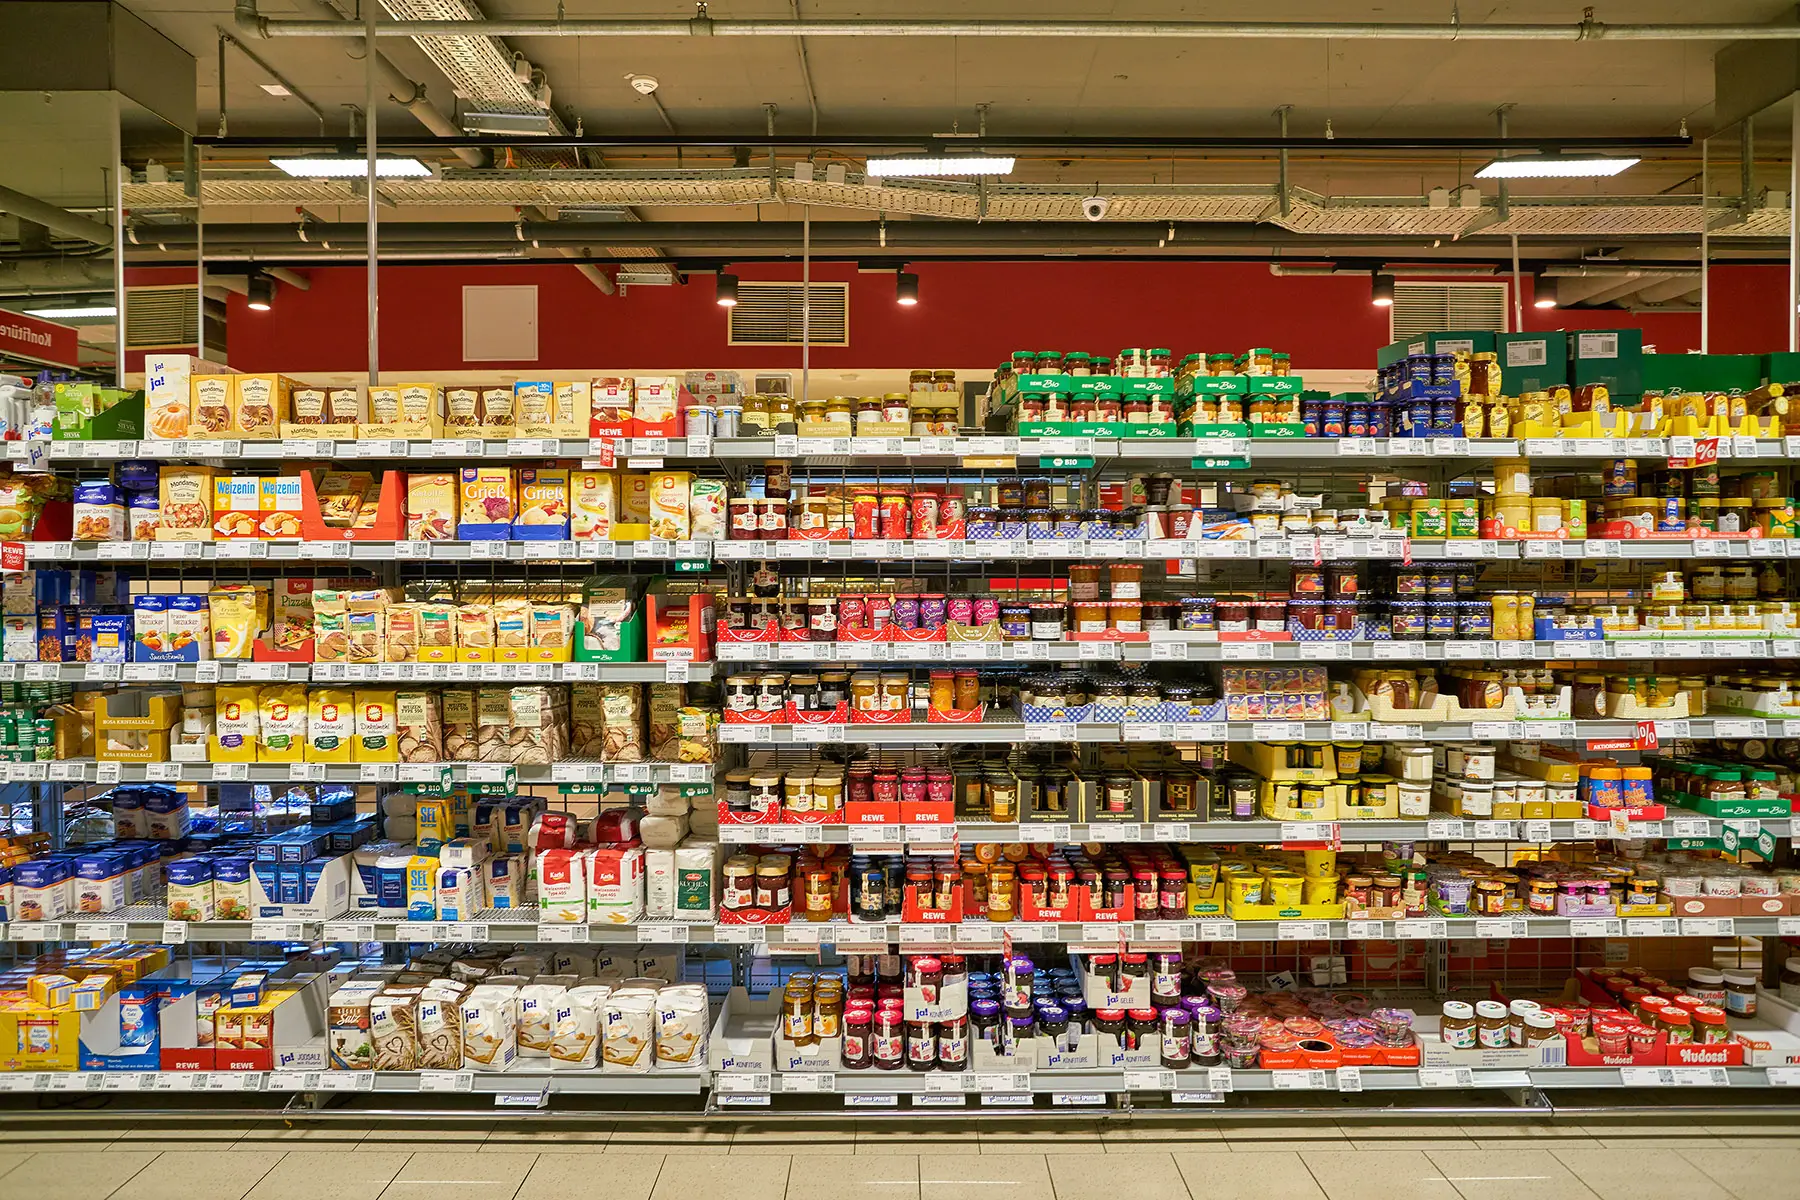 Supermarket shelves filled with products